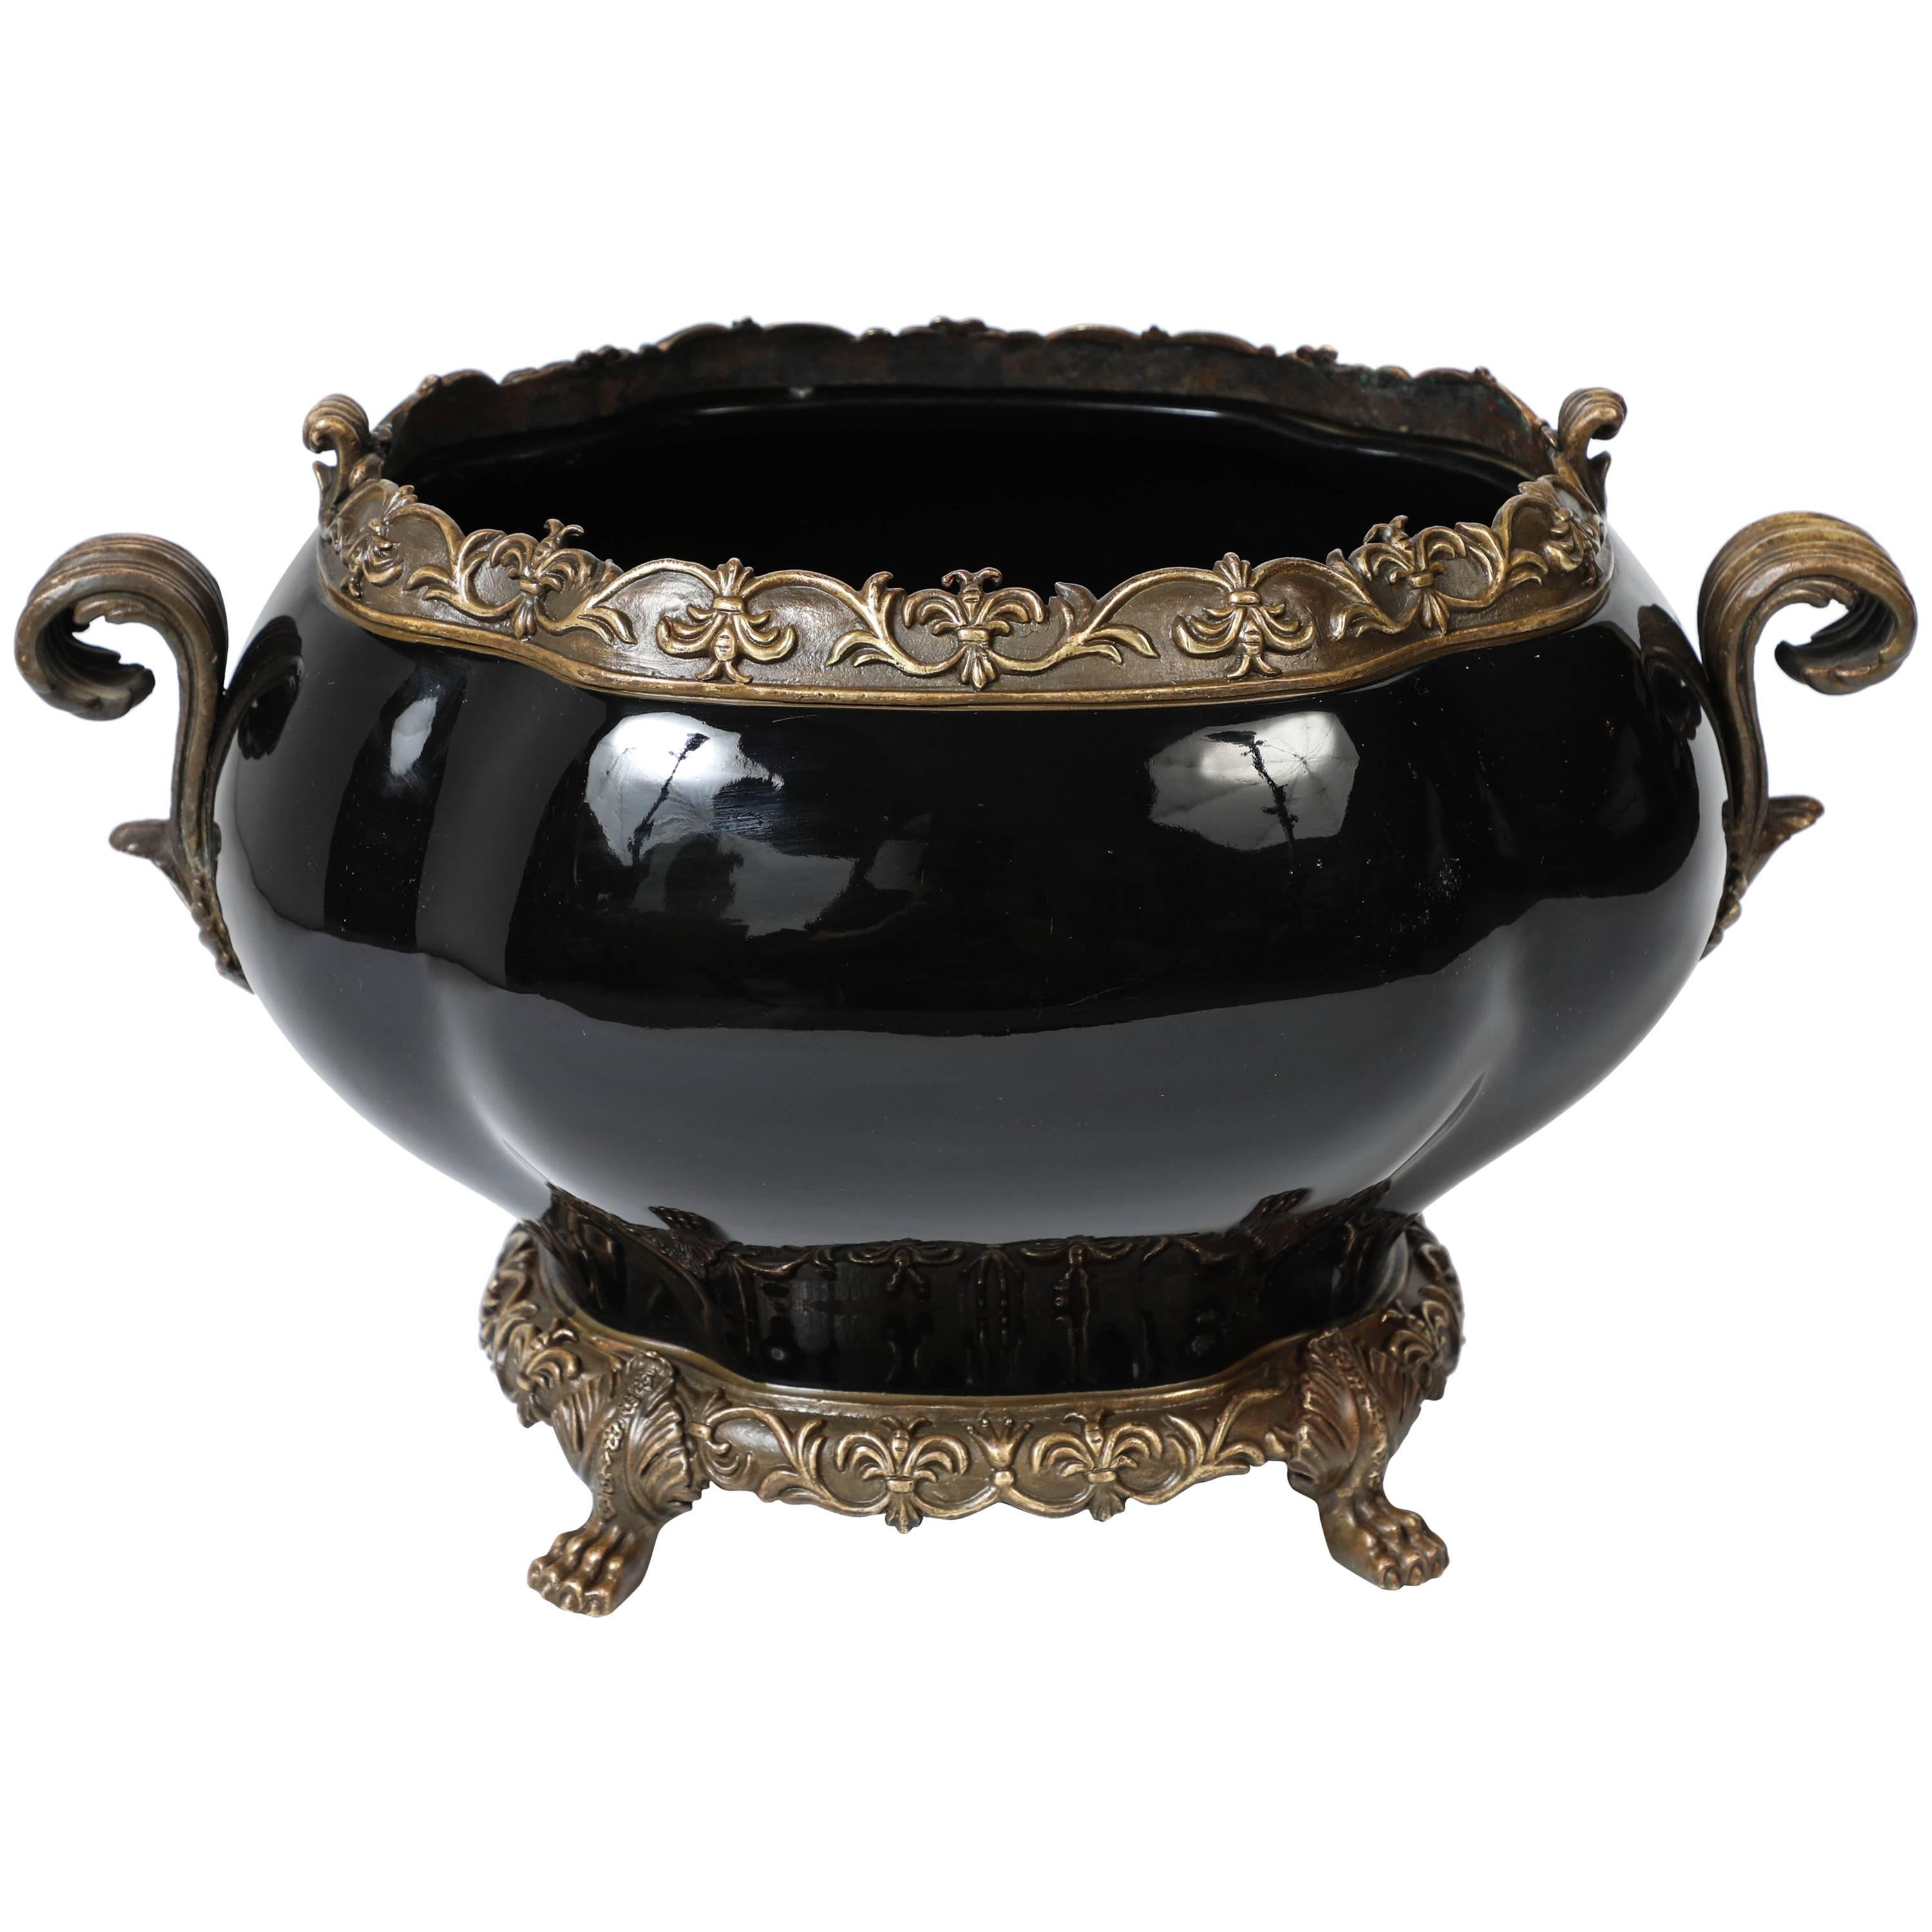 Vintage Black Ceramic and Claw-Footed Compote / Tureen